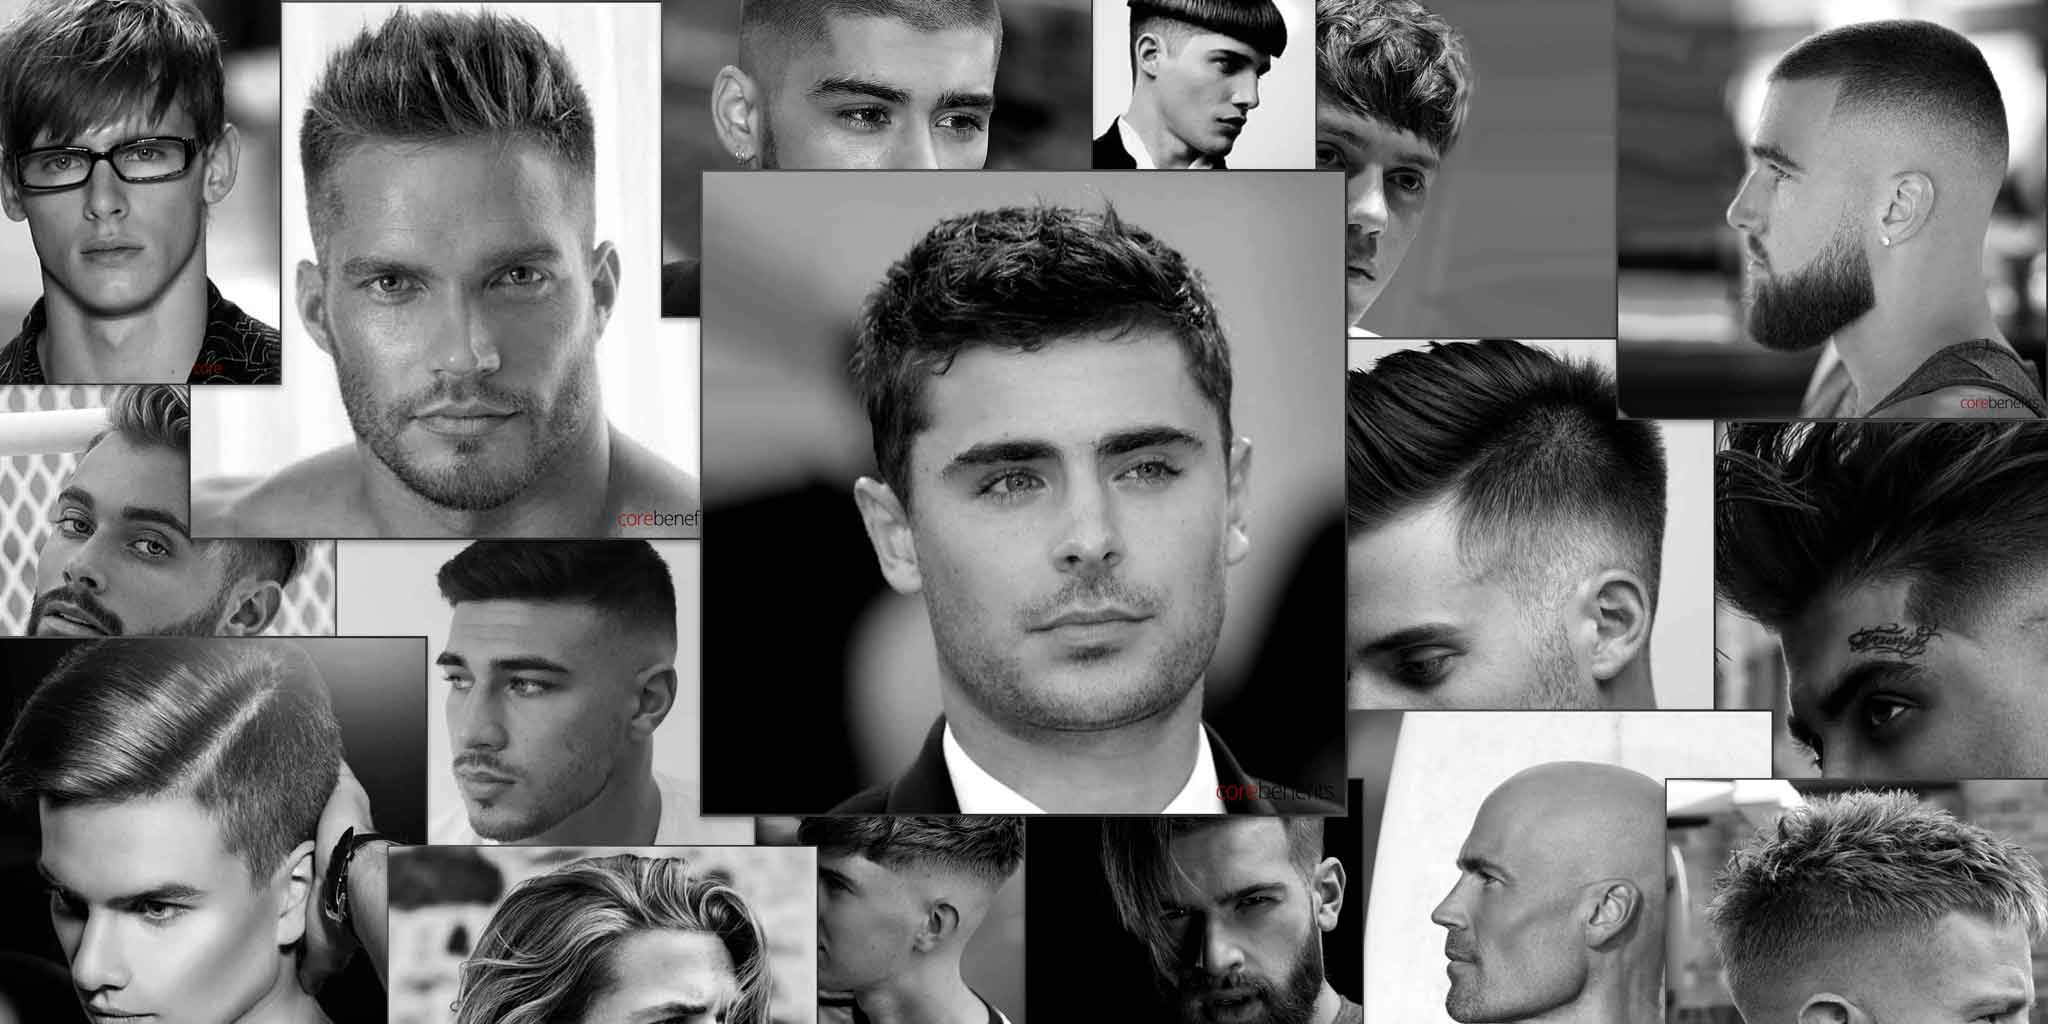 best hairstyles for men